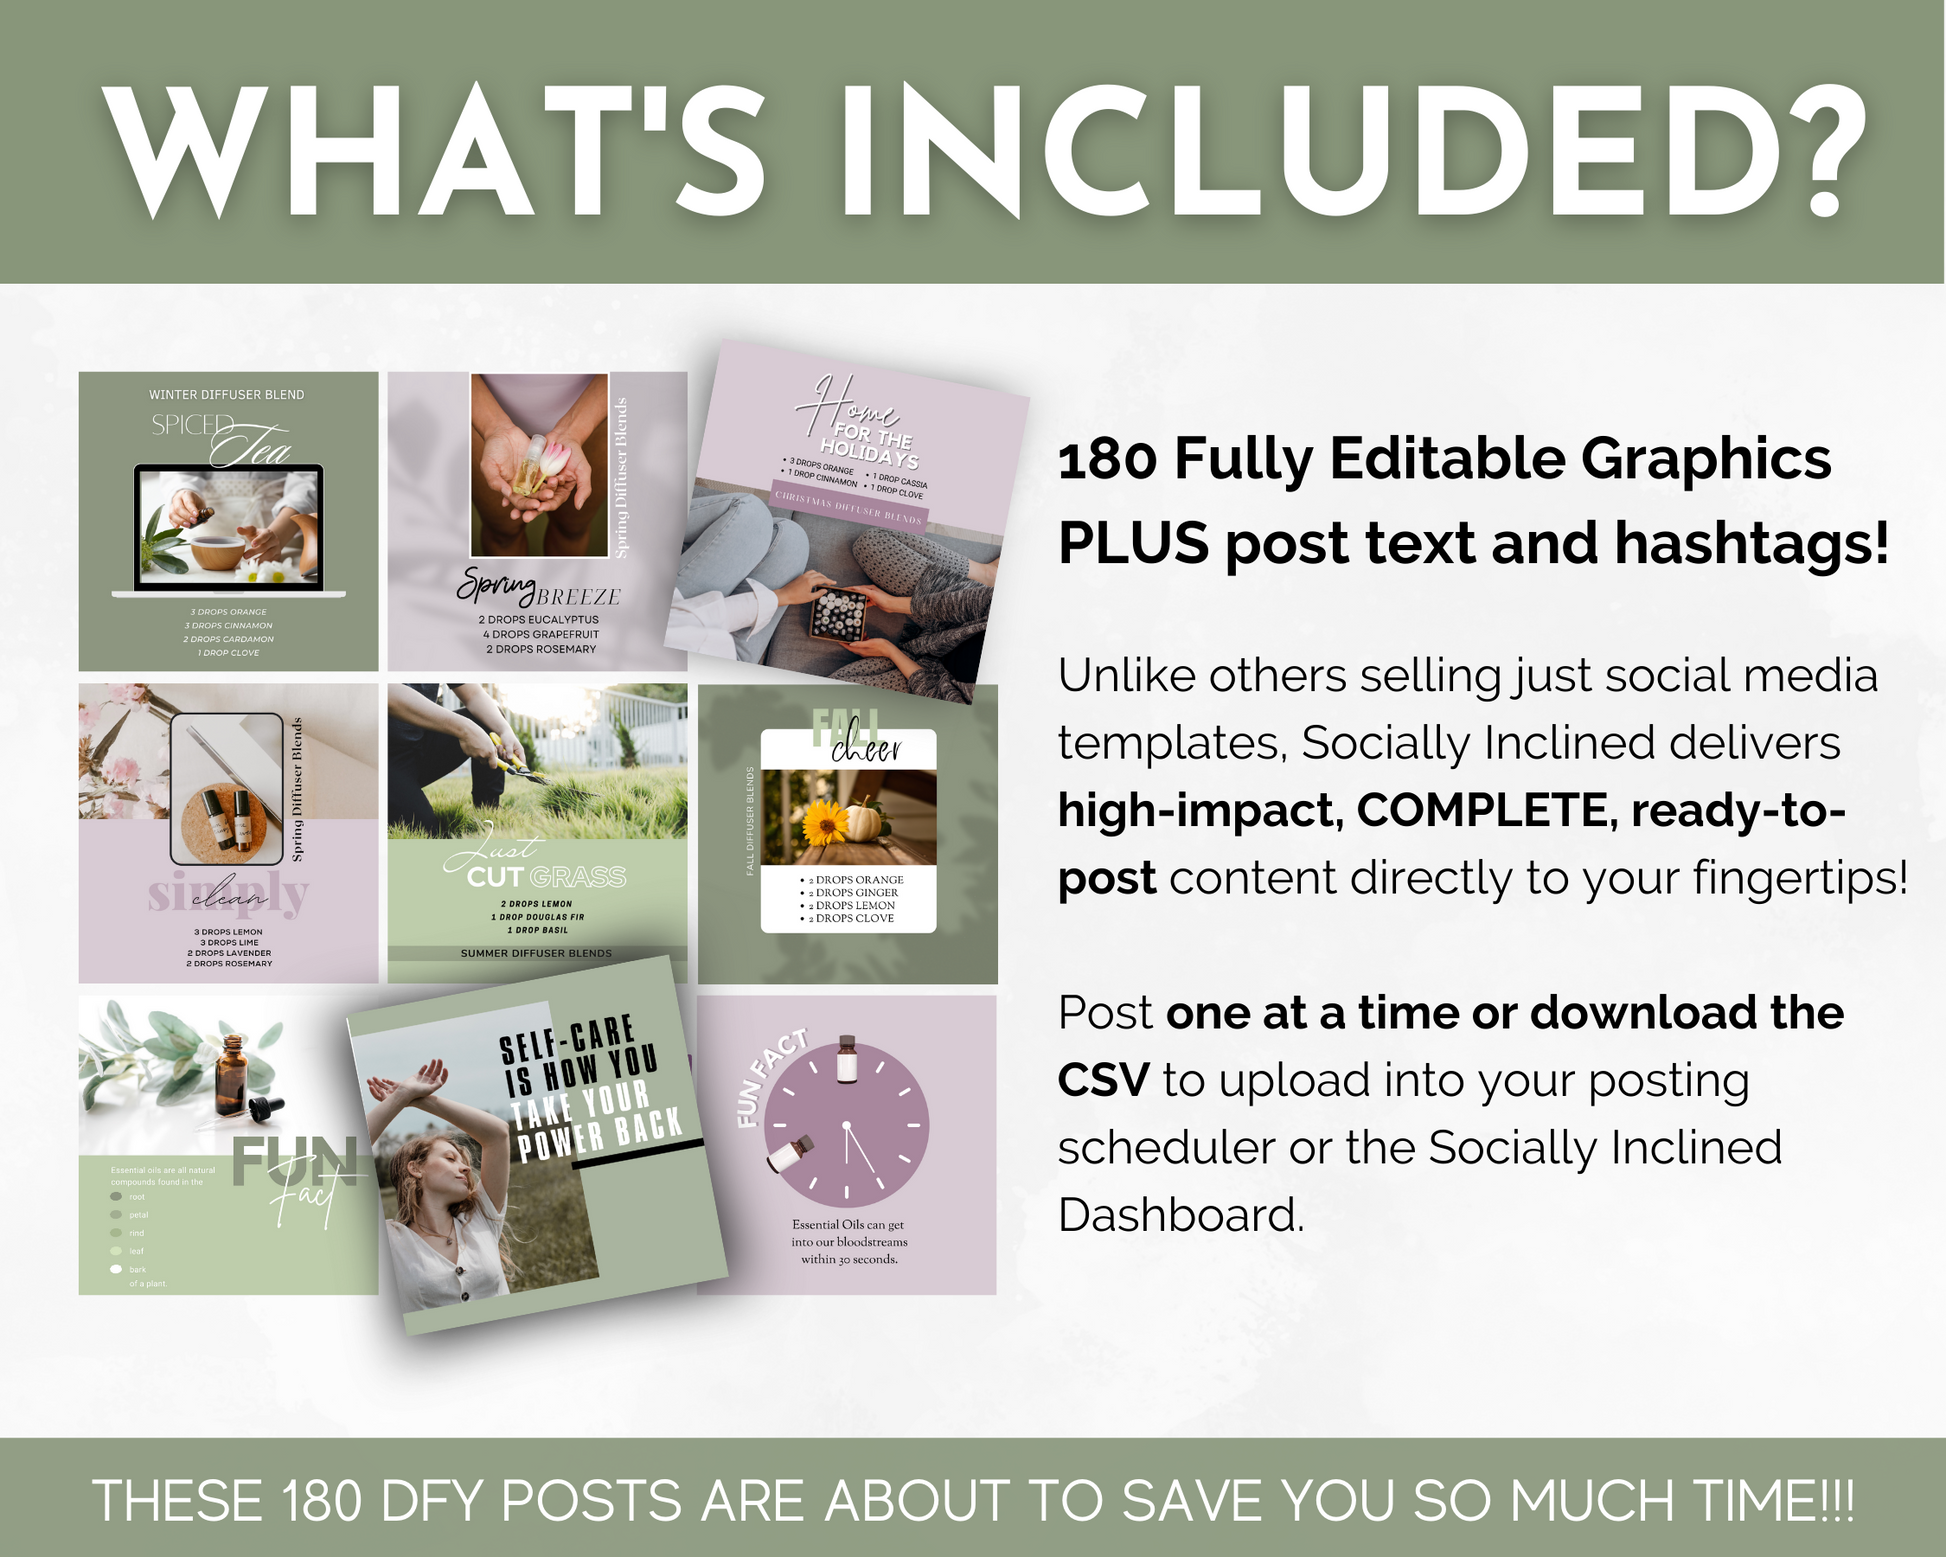 Discover what's included in our Essential Oils Social Media Post Bundle with Canva Templates, inspired by Socially Inclined wellness.